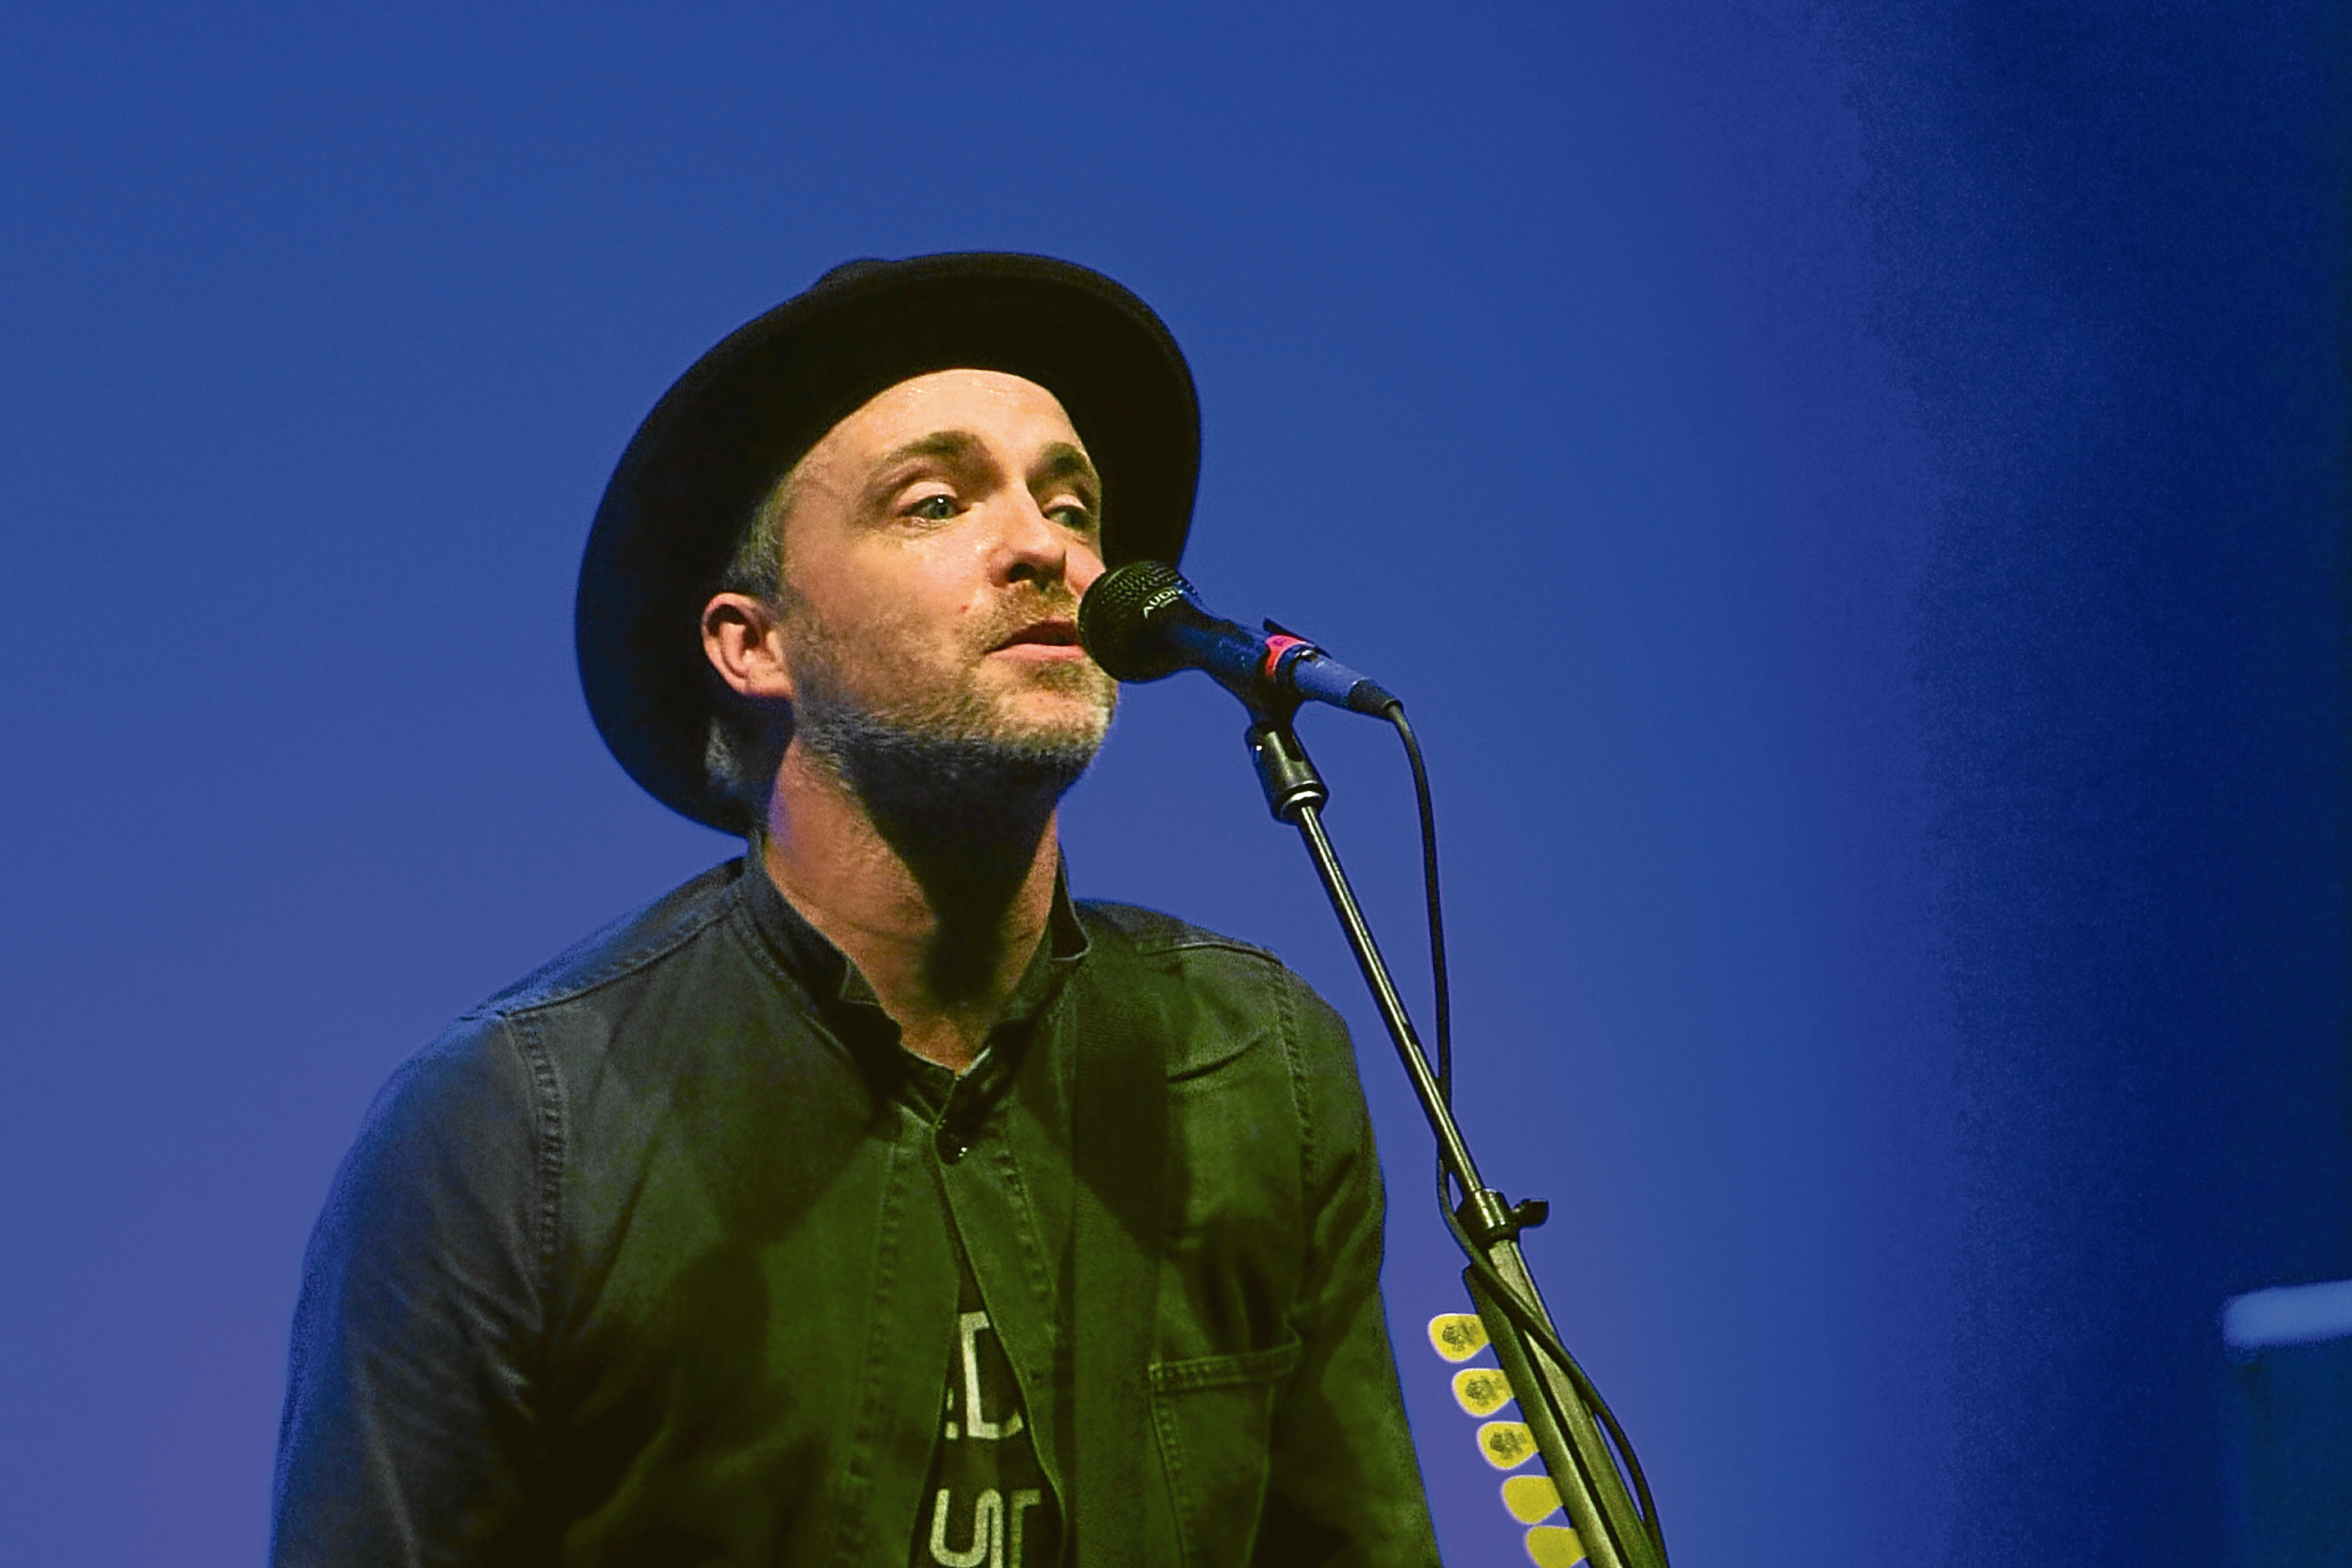 Fran Healy of Travis (Kristian Dowling/Getty Images)